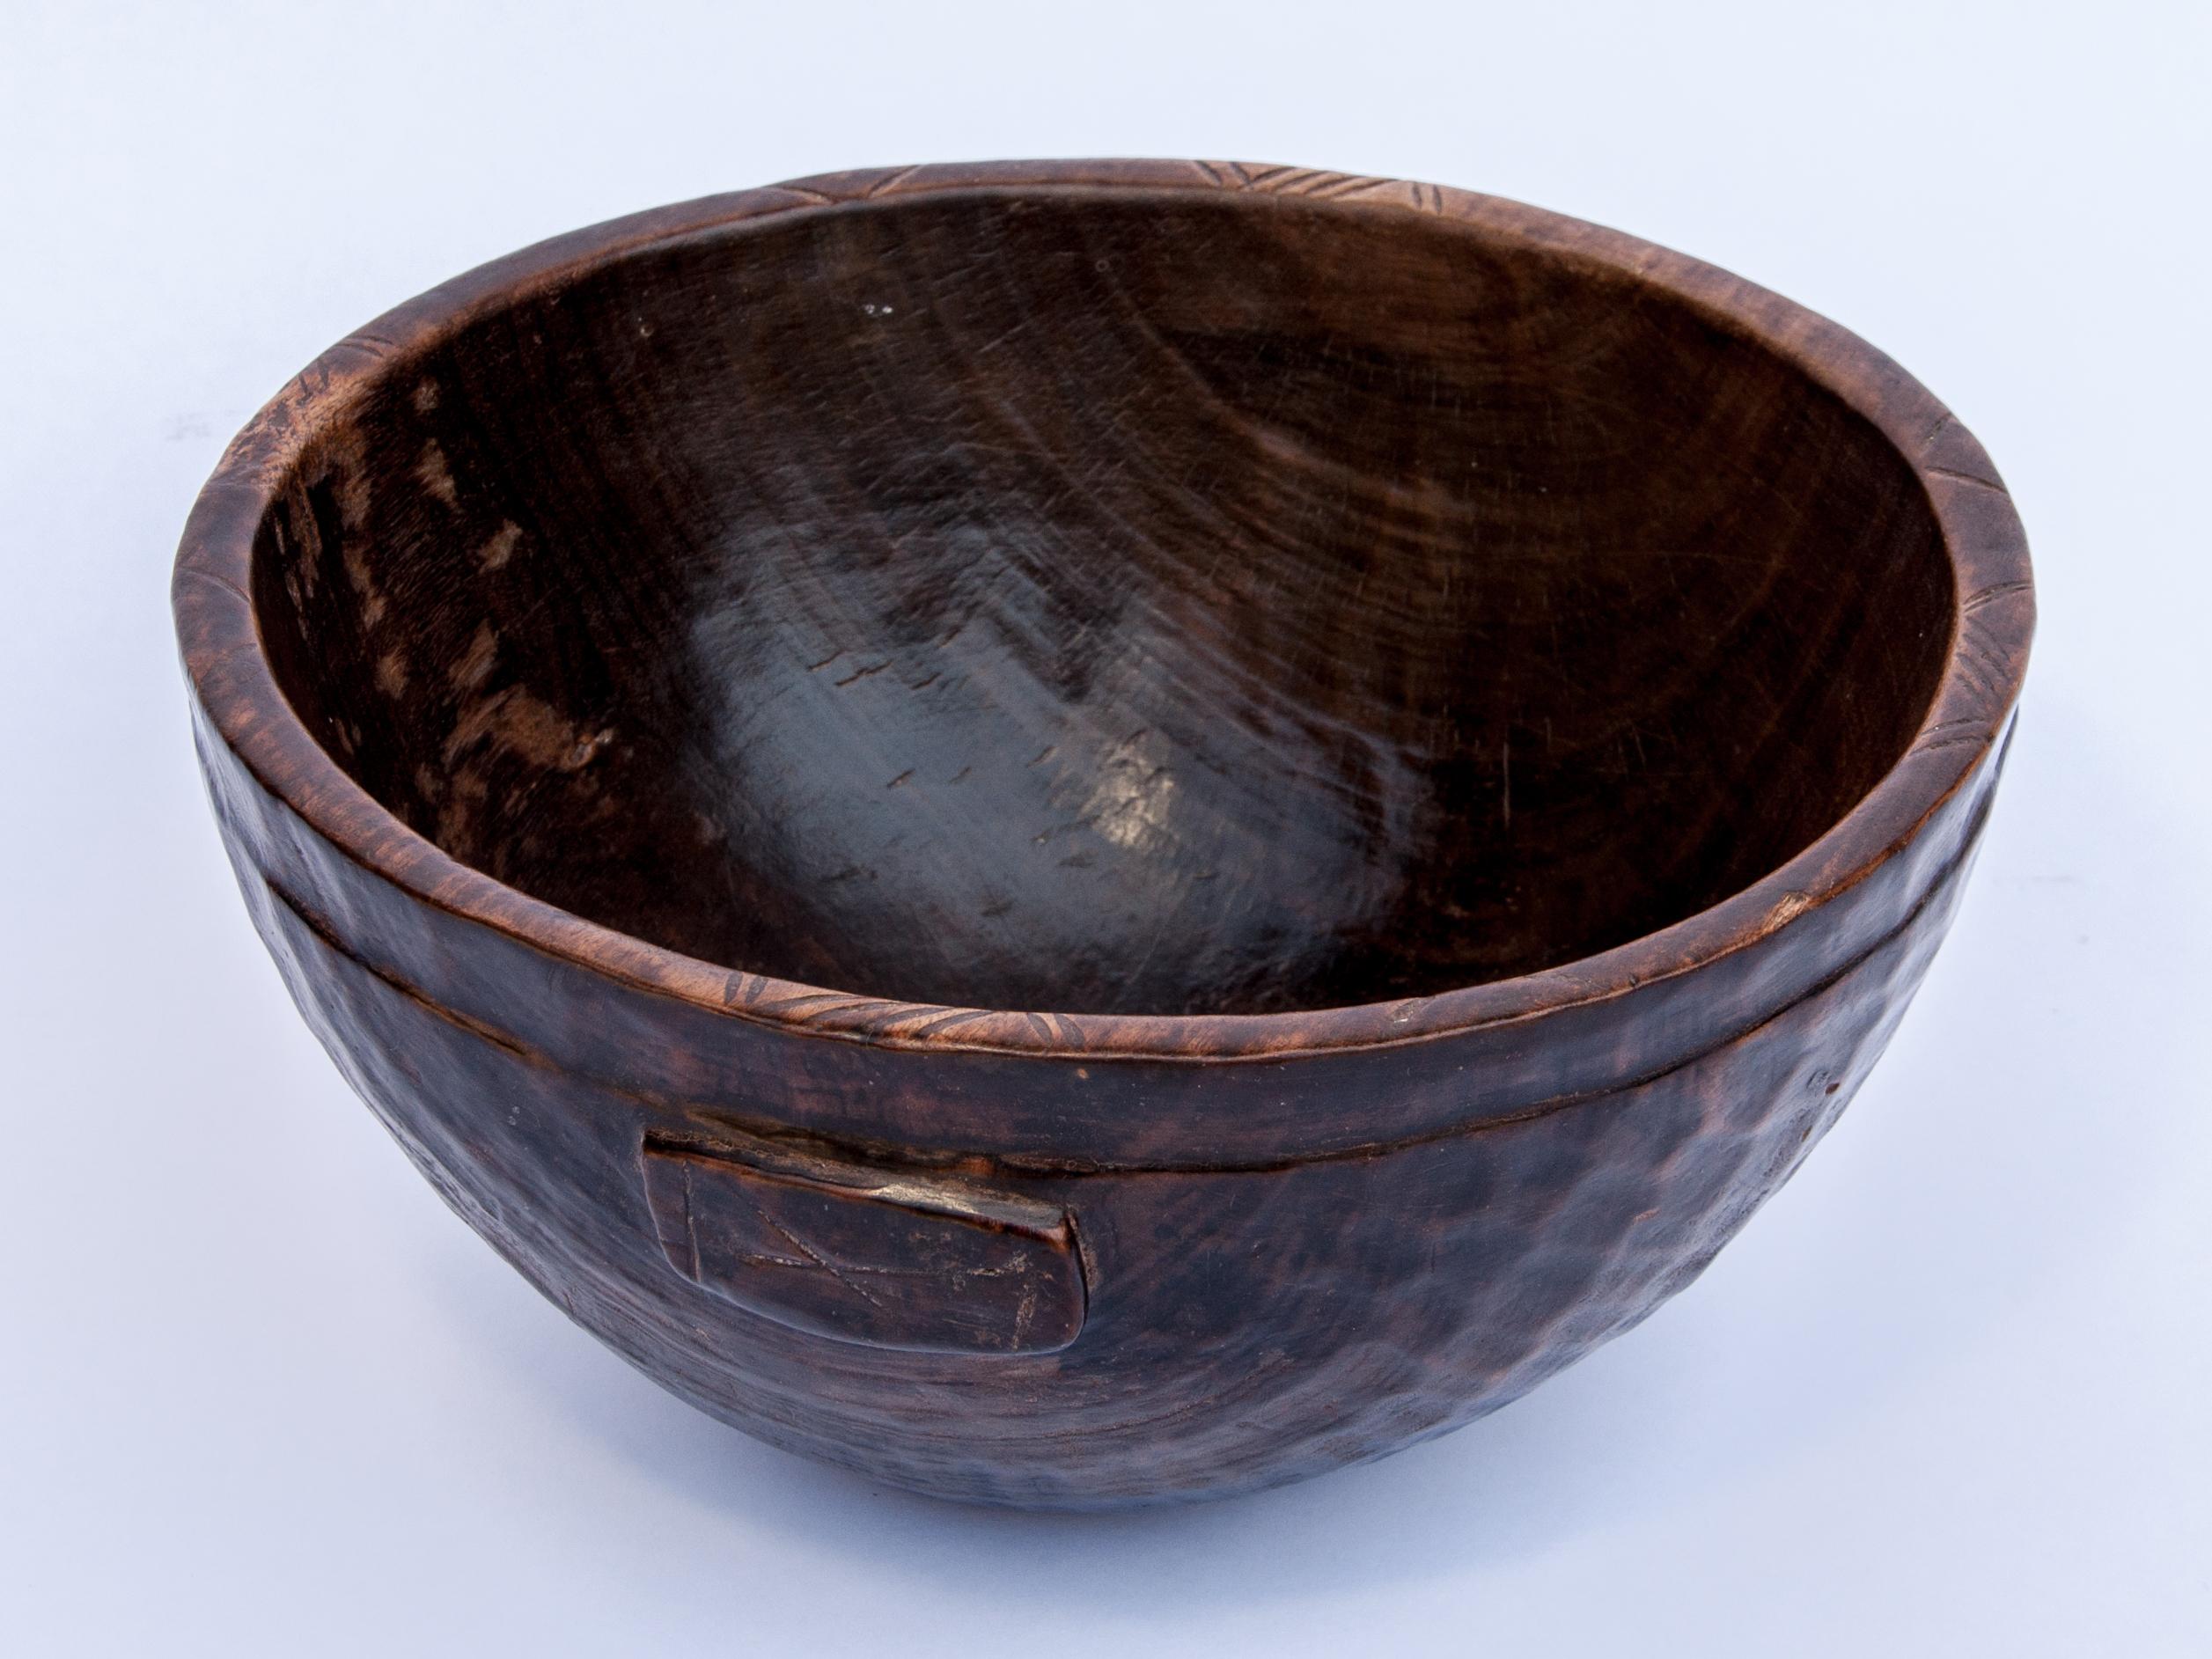 Nigerien Tribal Wooden Bowl, Hand Hewn, from Niger, Mid-20th Century